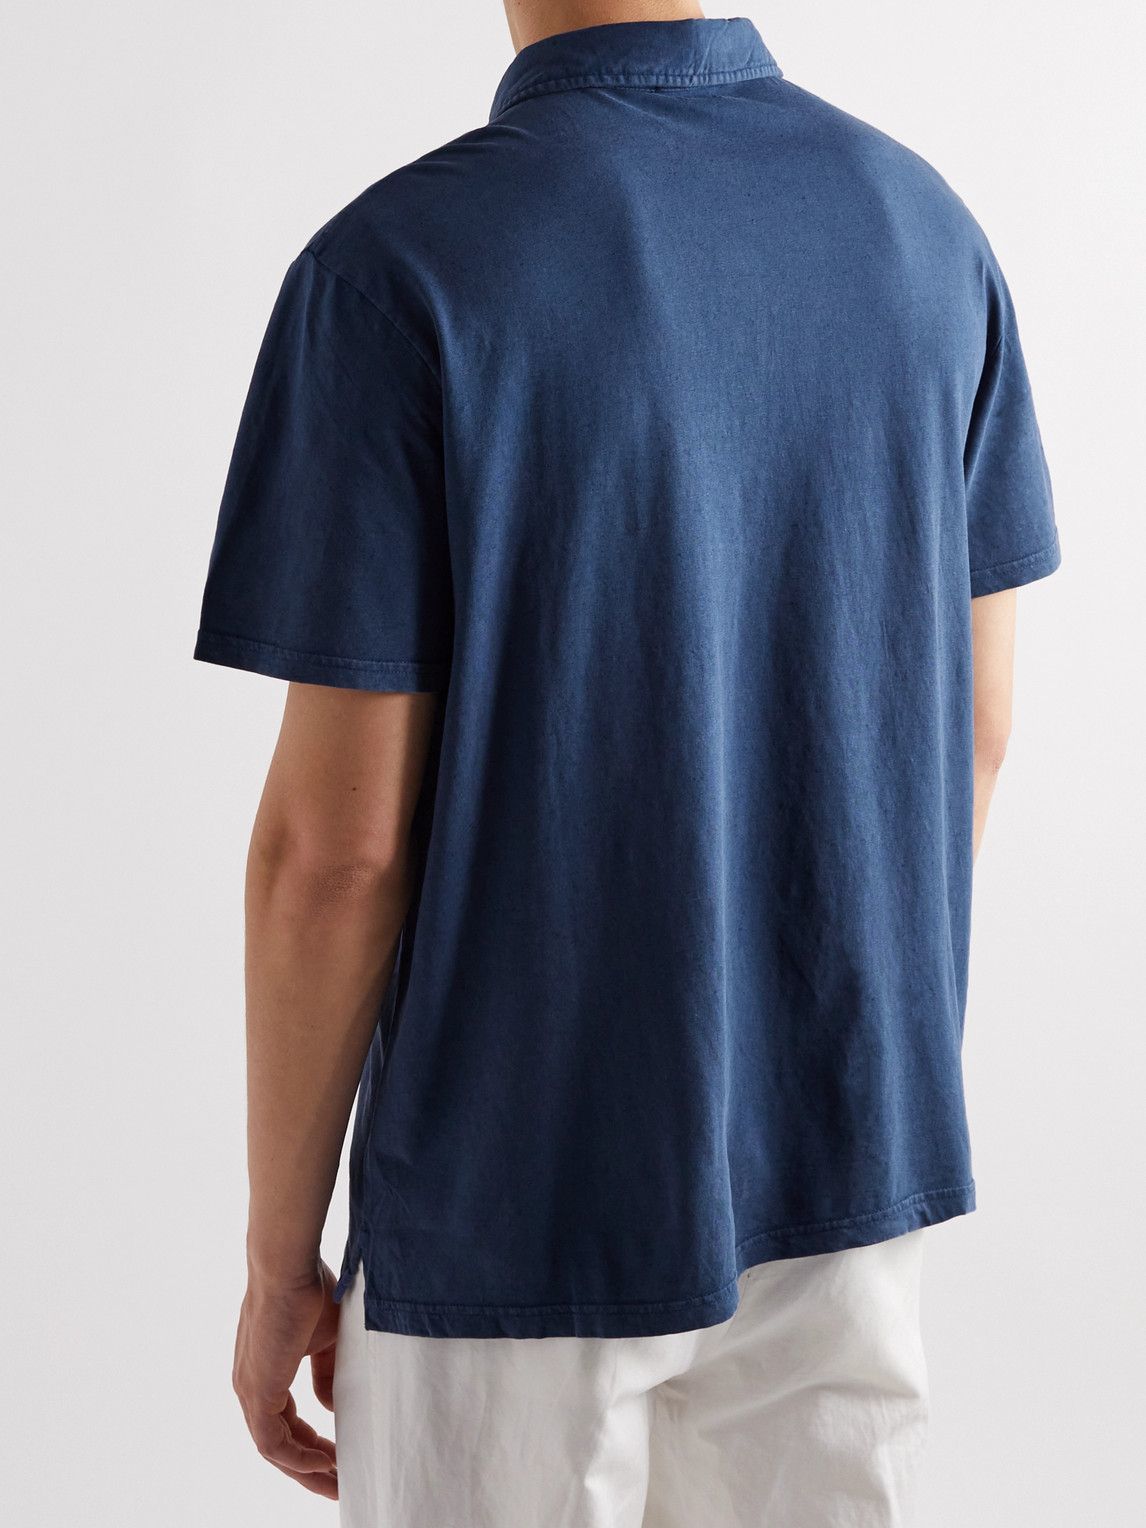 Polo Ralph Lauren - Slim-Fit Logo-Embroidered Garment-Dyed Cotton and Linen-Blend Polo Shirt - Blue